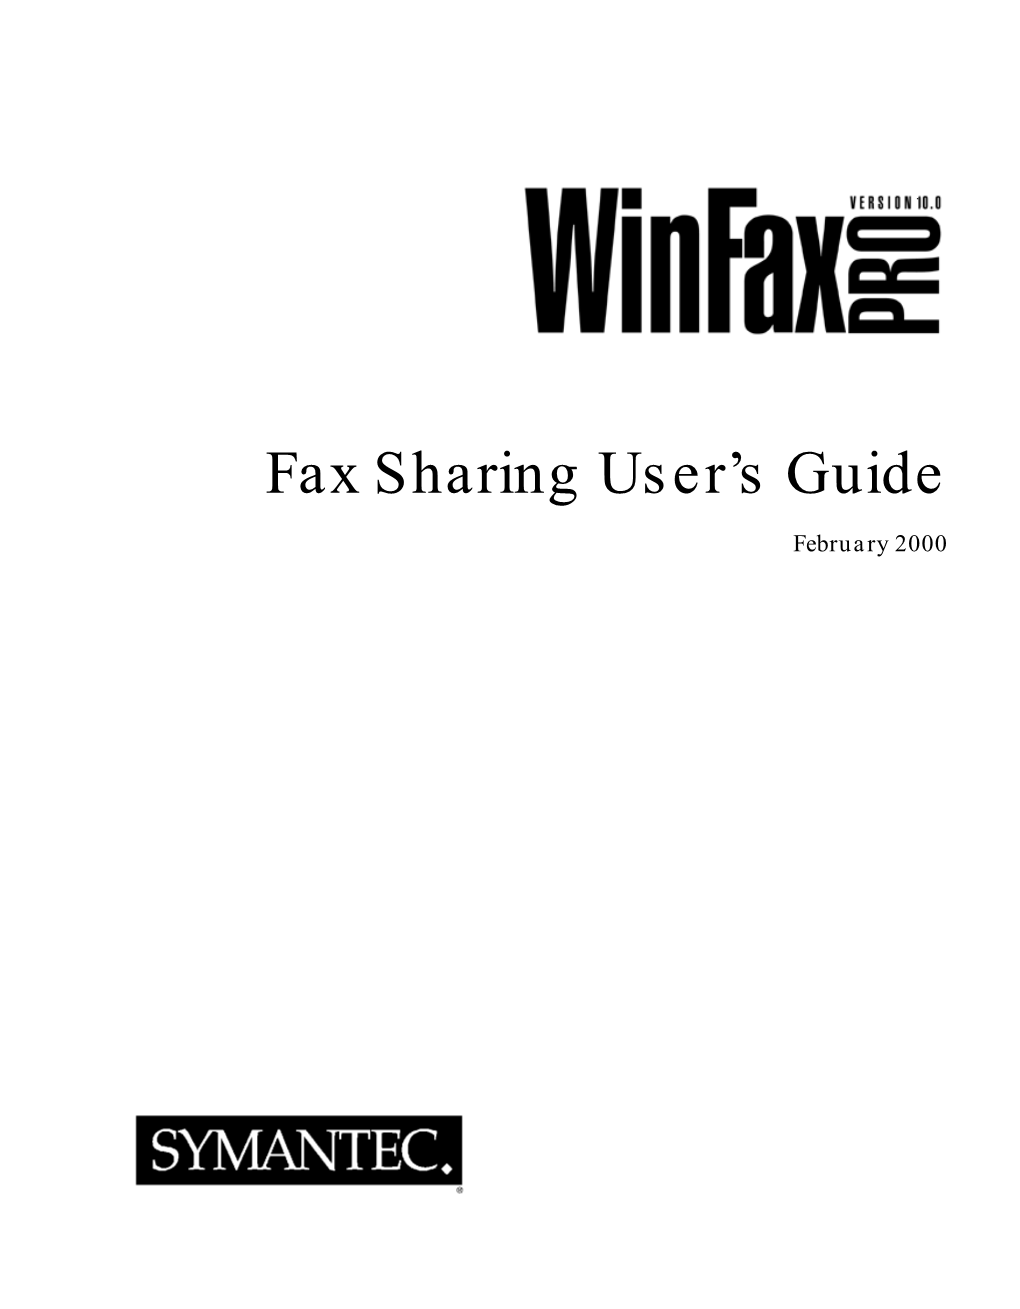 Fax Sharing User's Guide